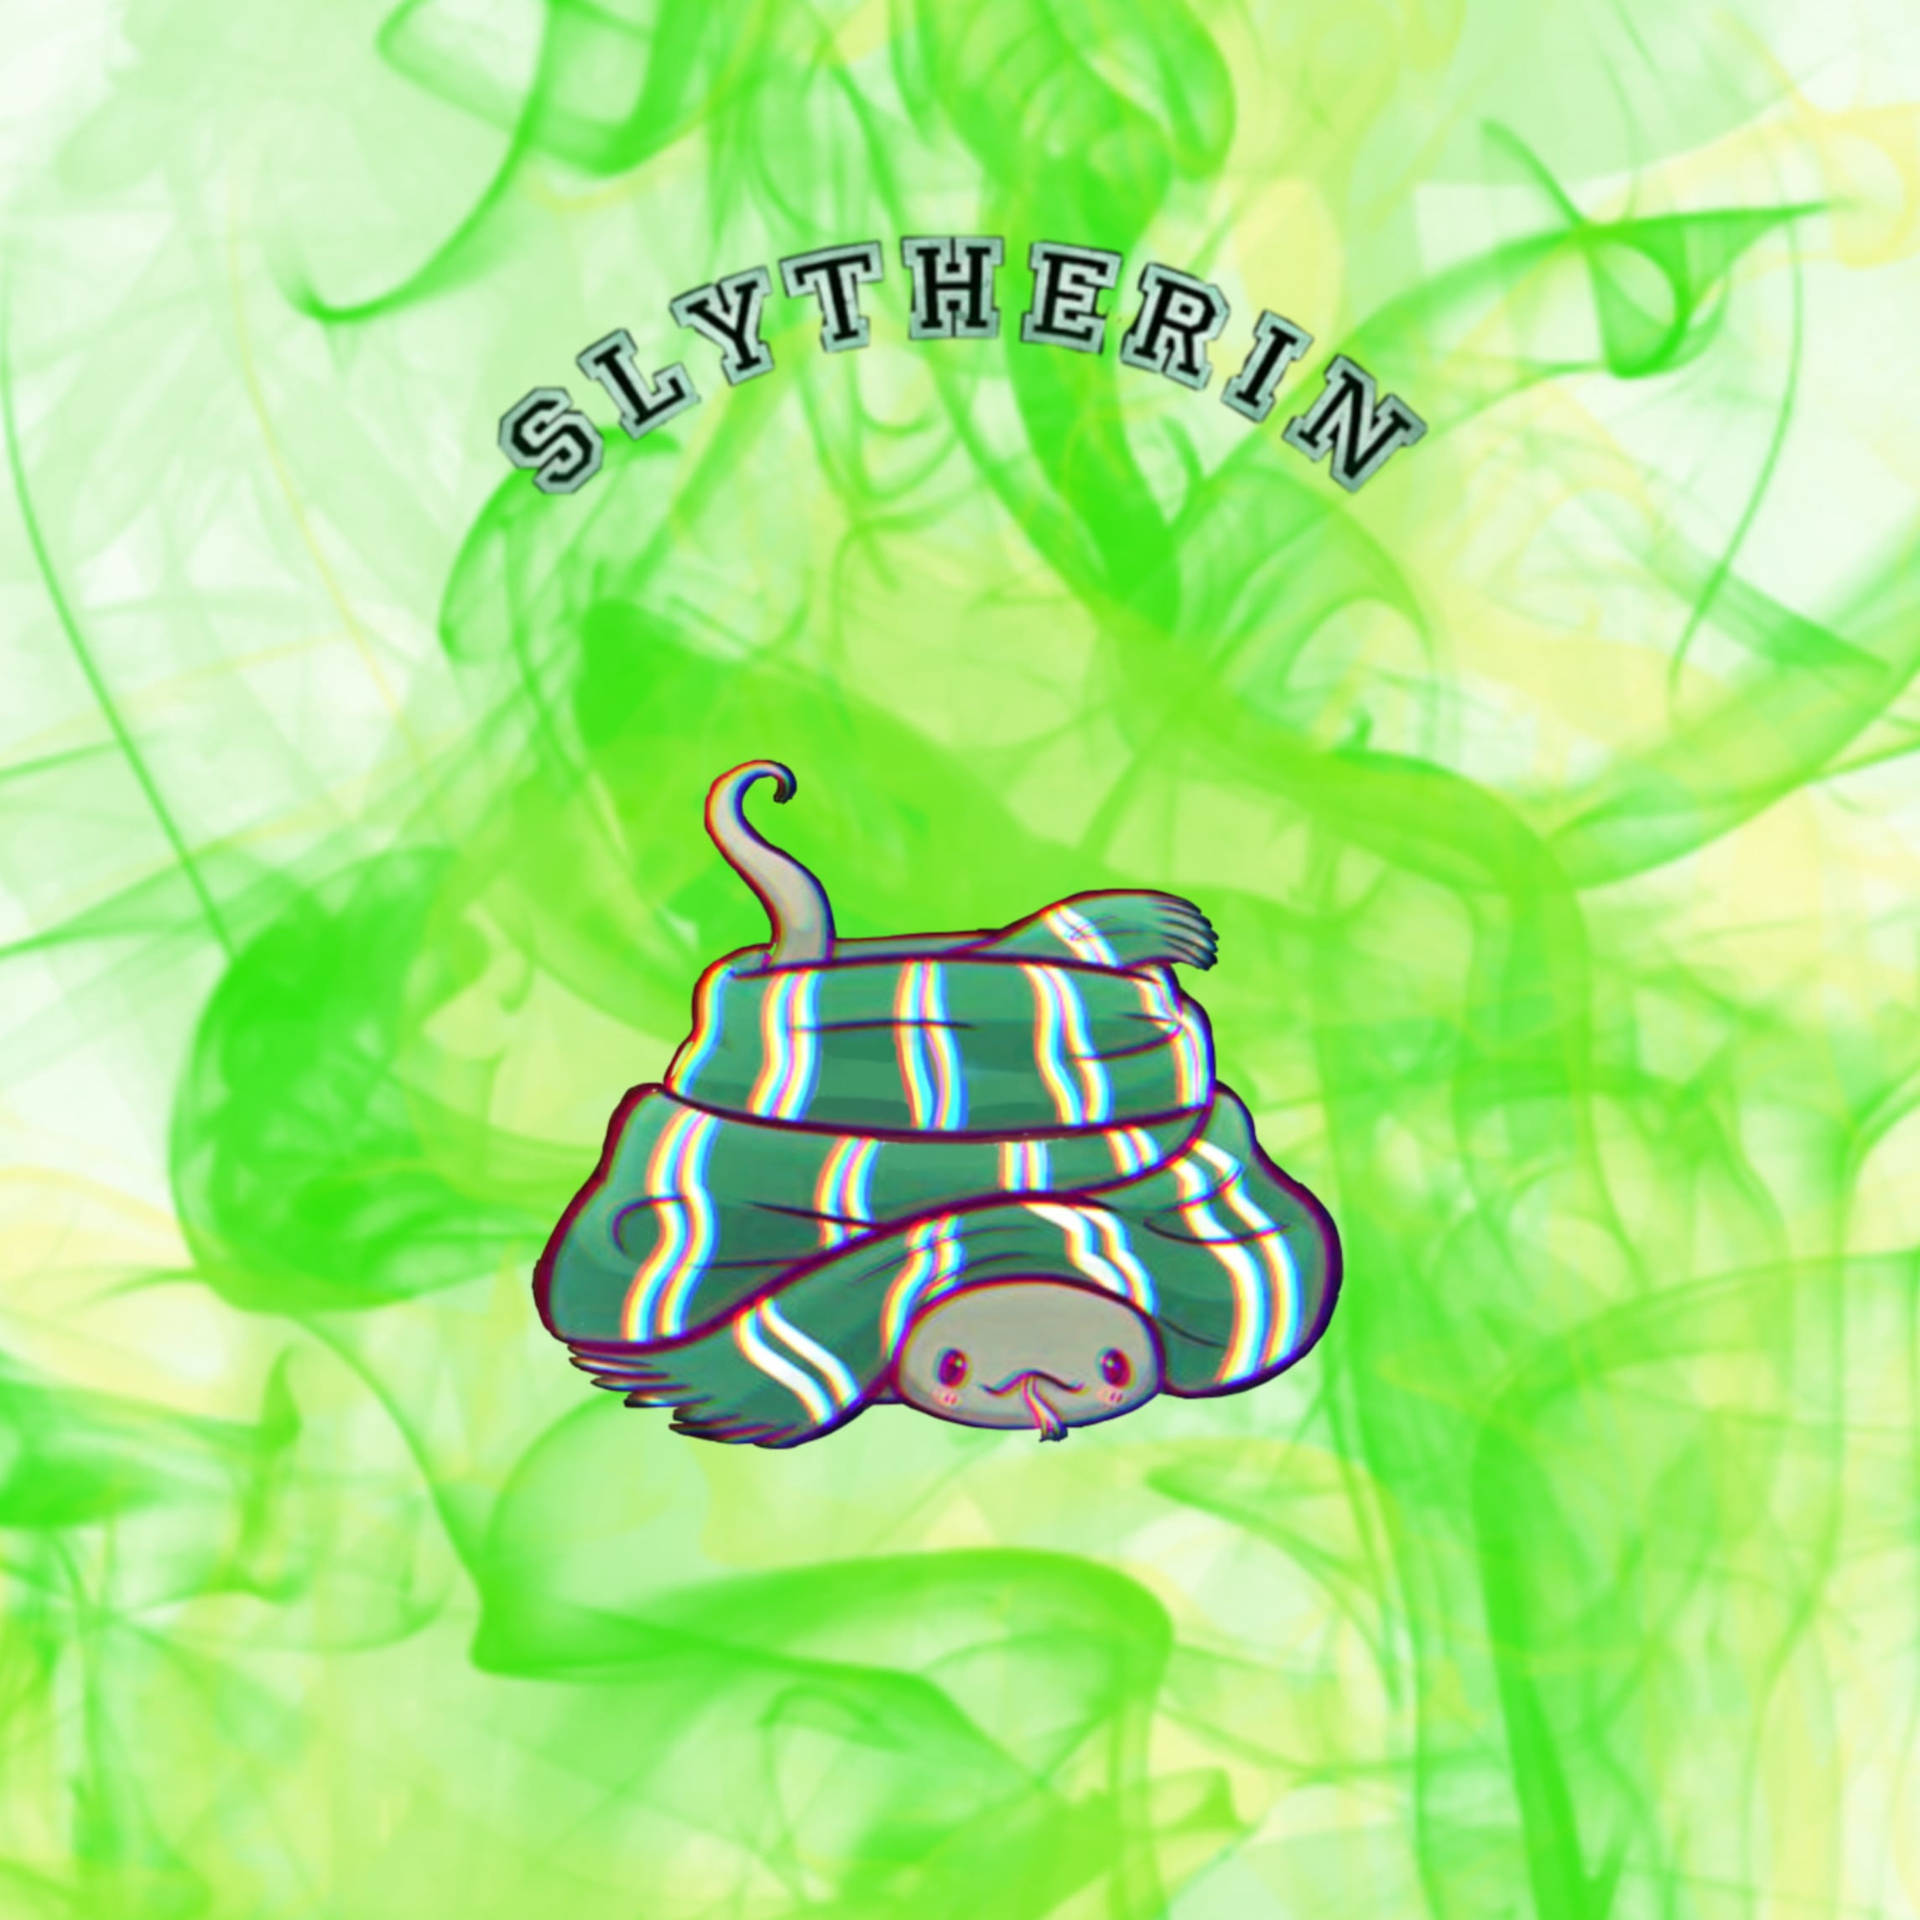 2289X2289 Slytherin Wallpaper and Background